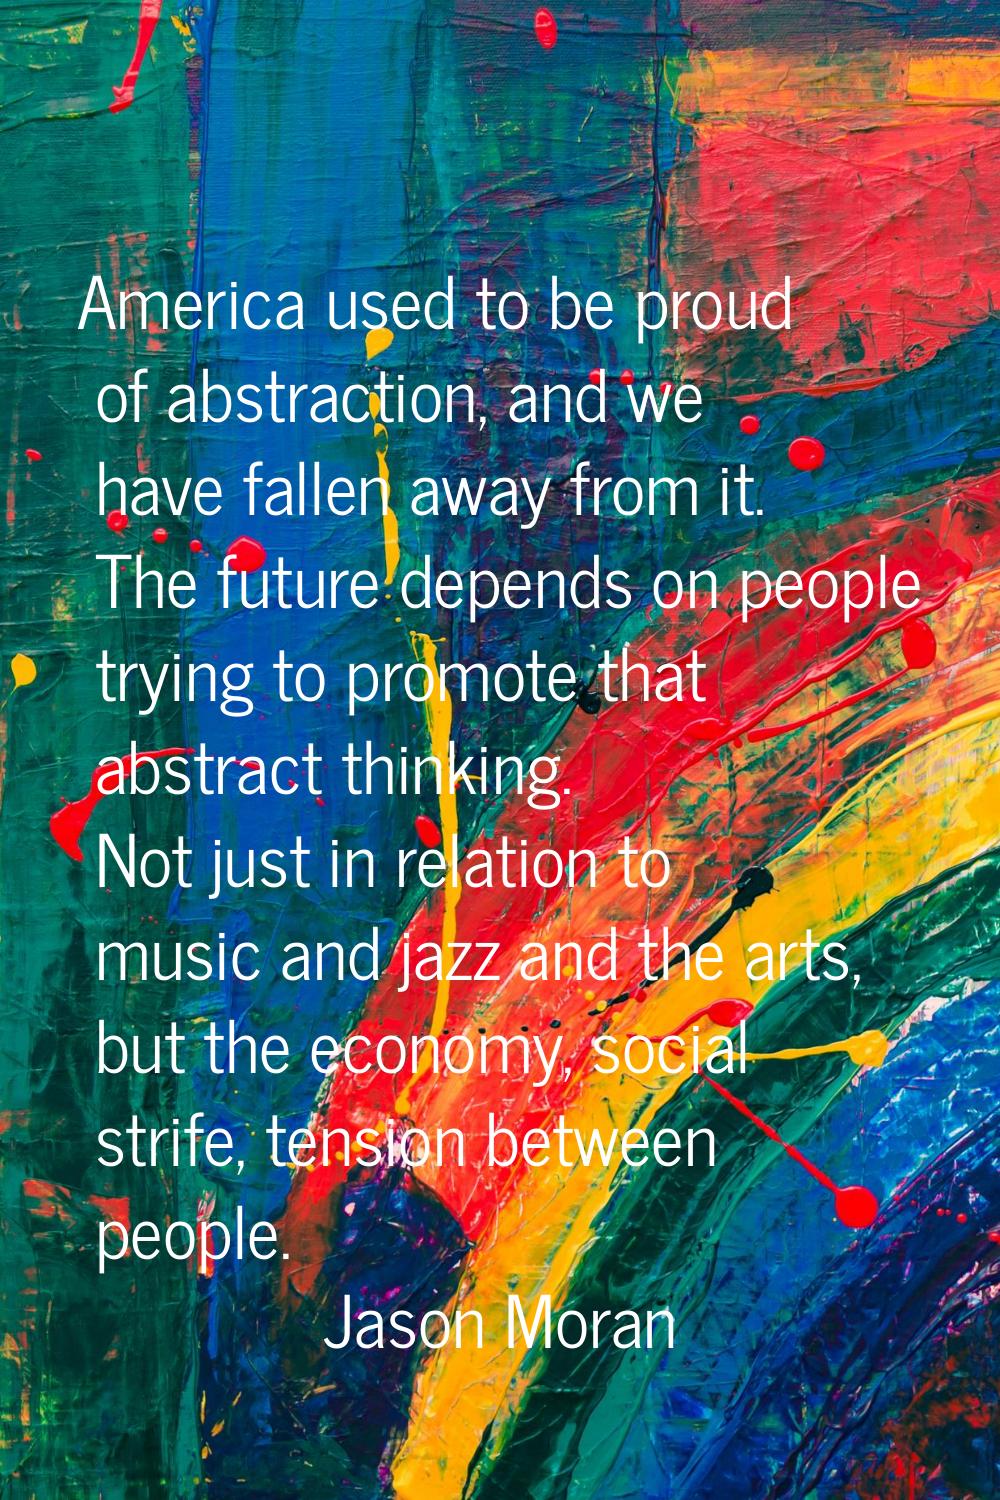 America used to be proud of abstraction, and we have fallen away from it. The future depends on peo